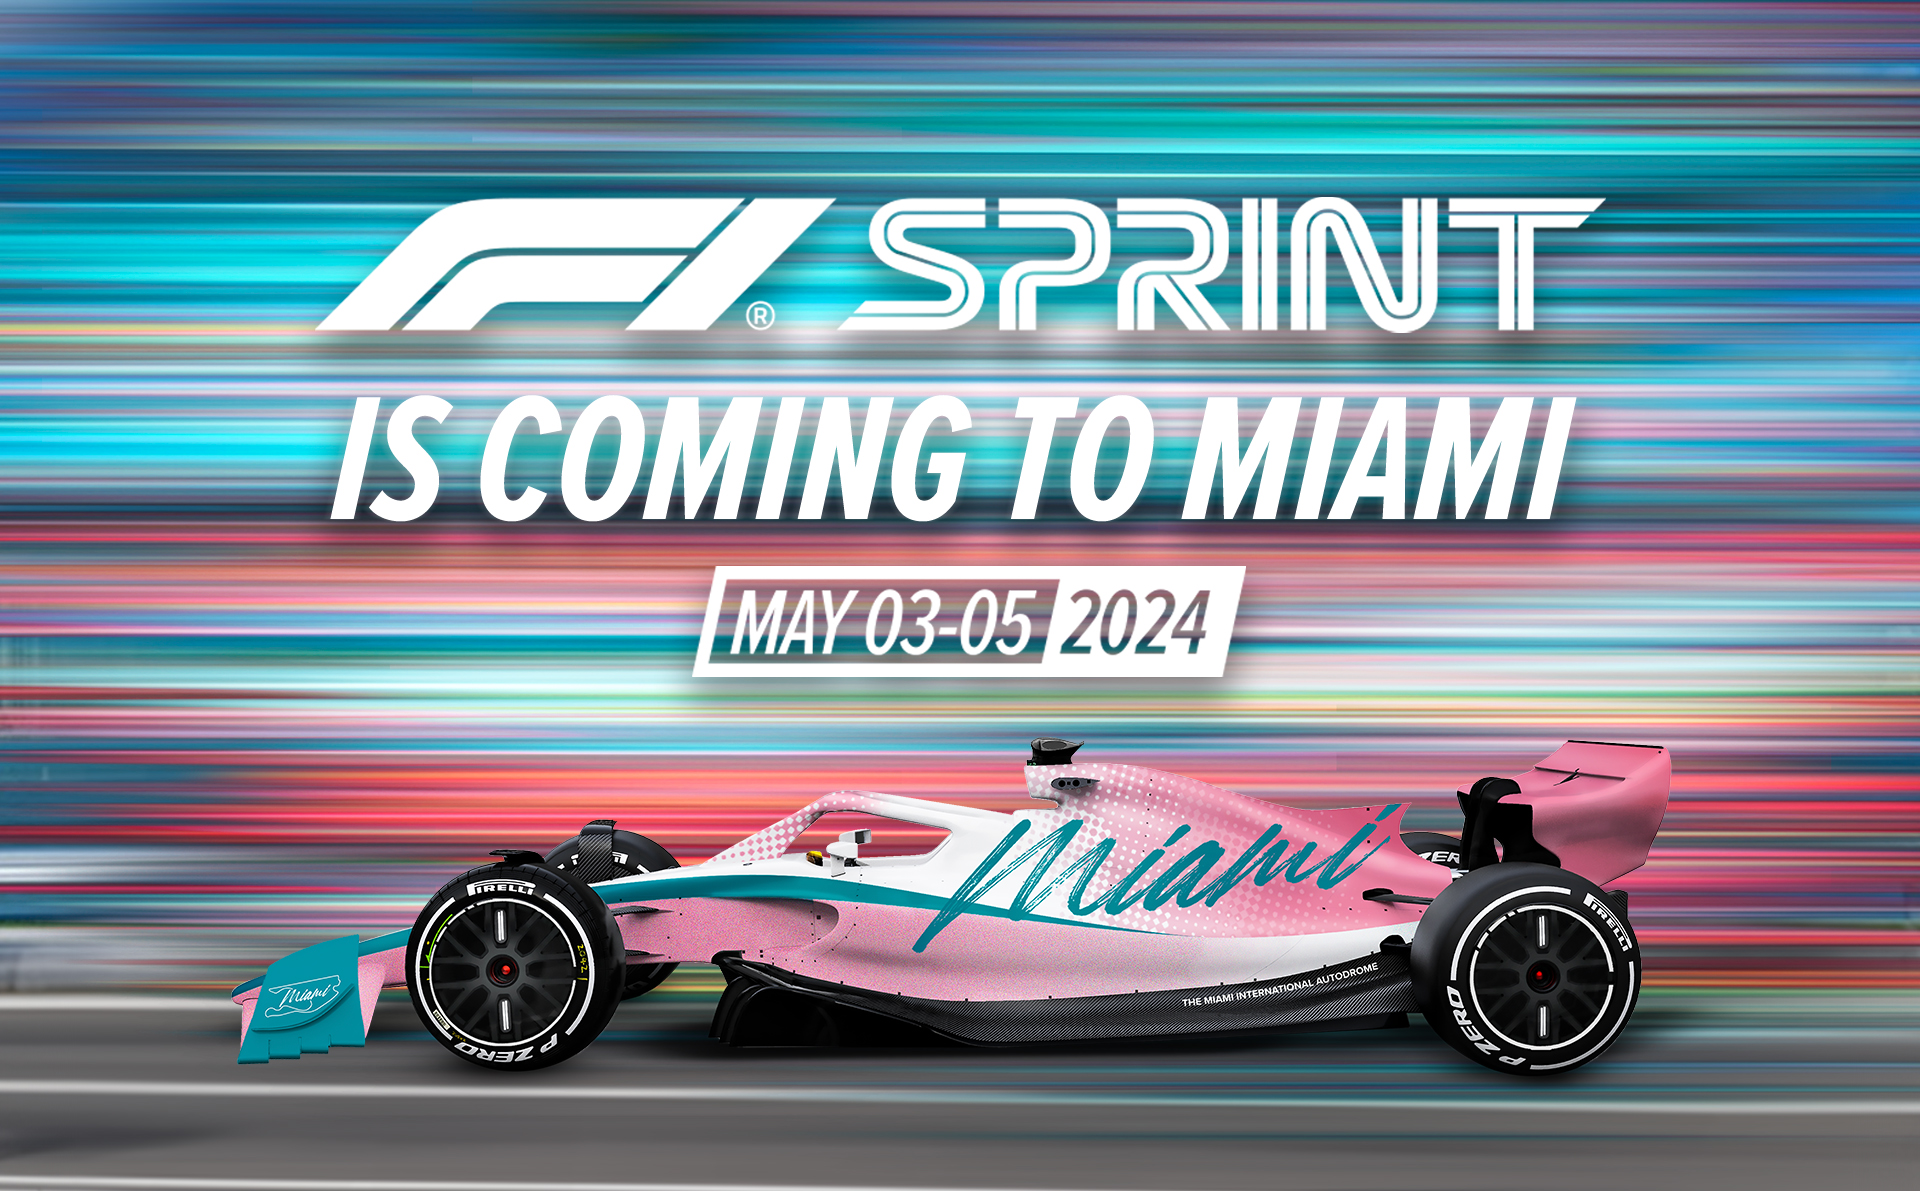 F1 Sprint - Is coming to Miami - May 3 - 5, 2024